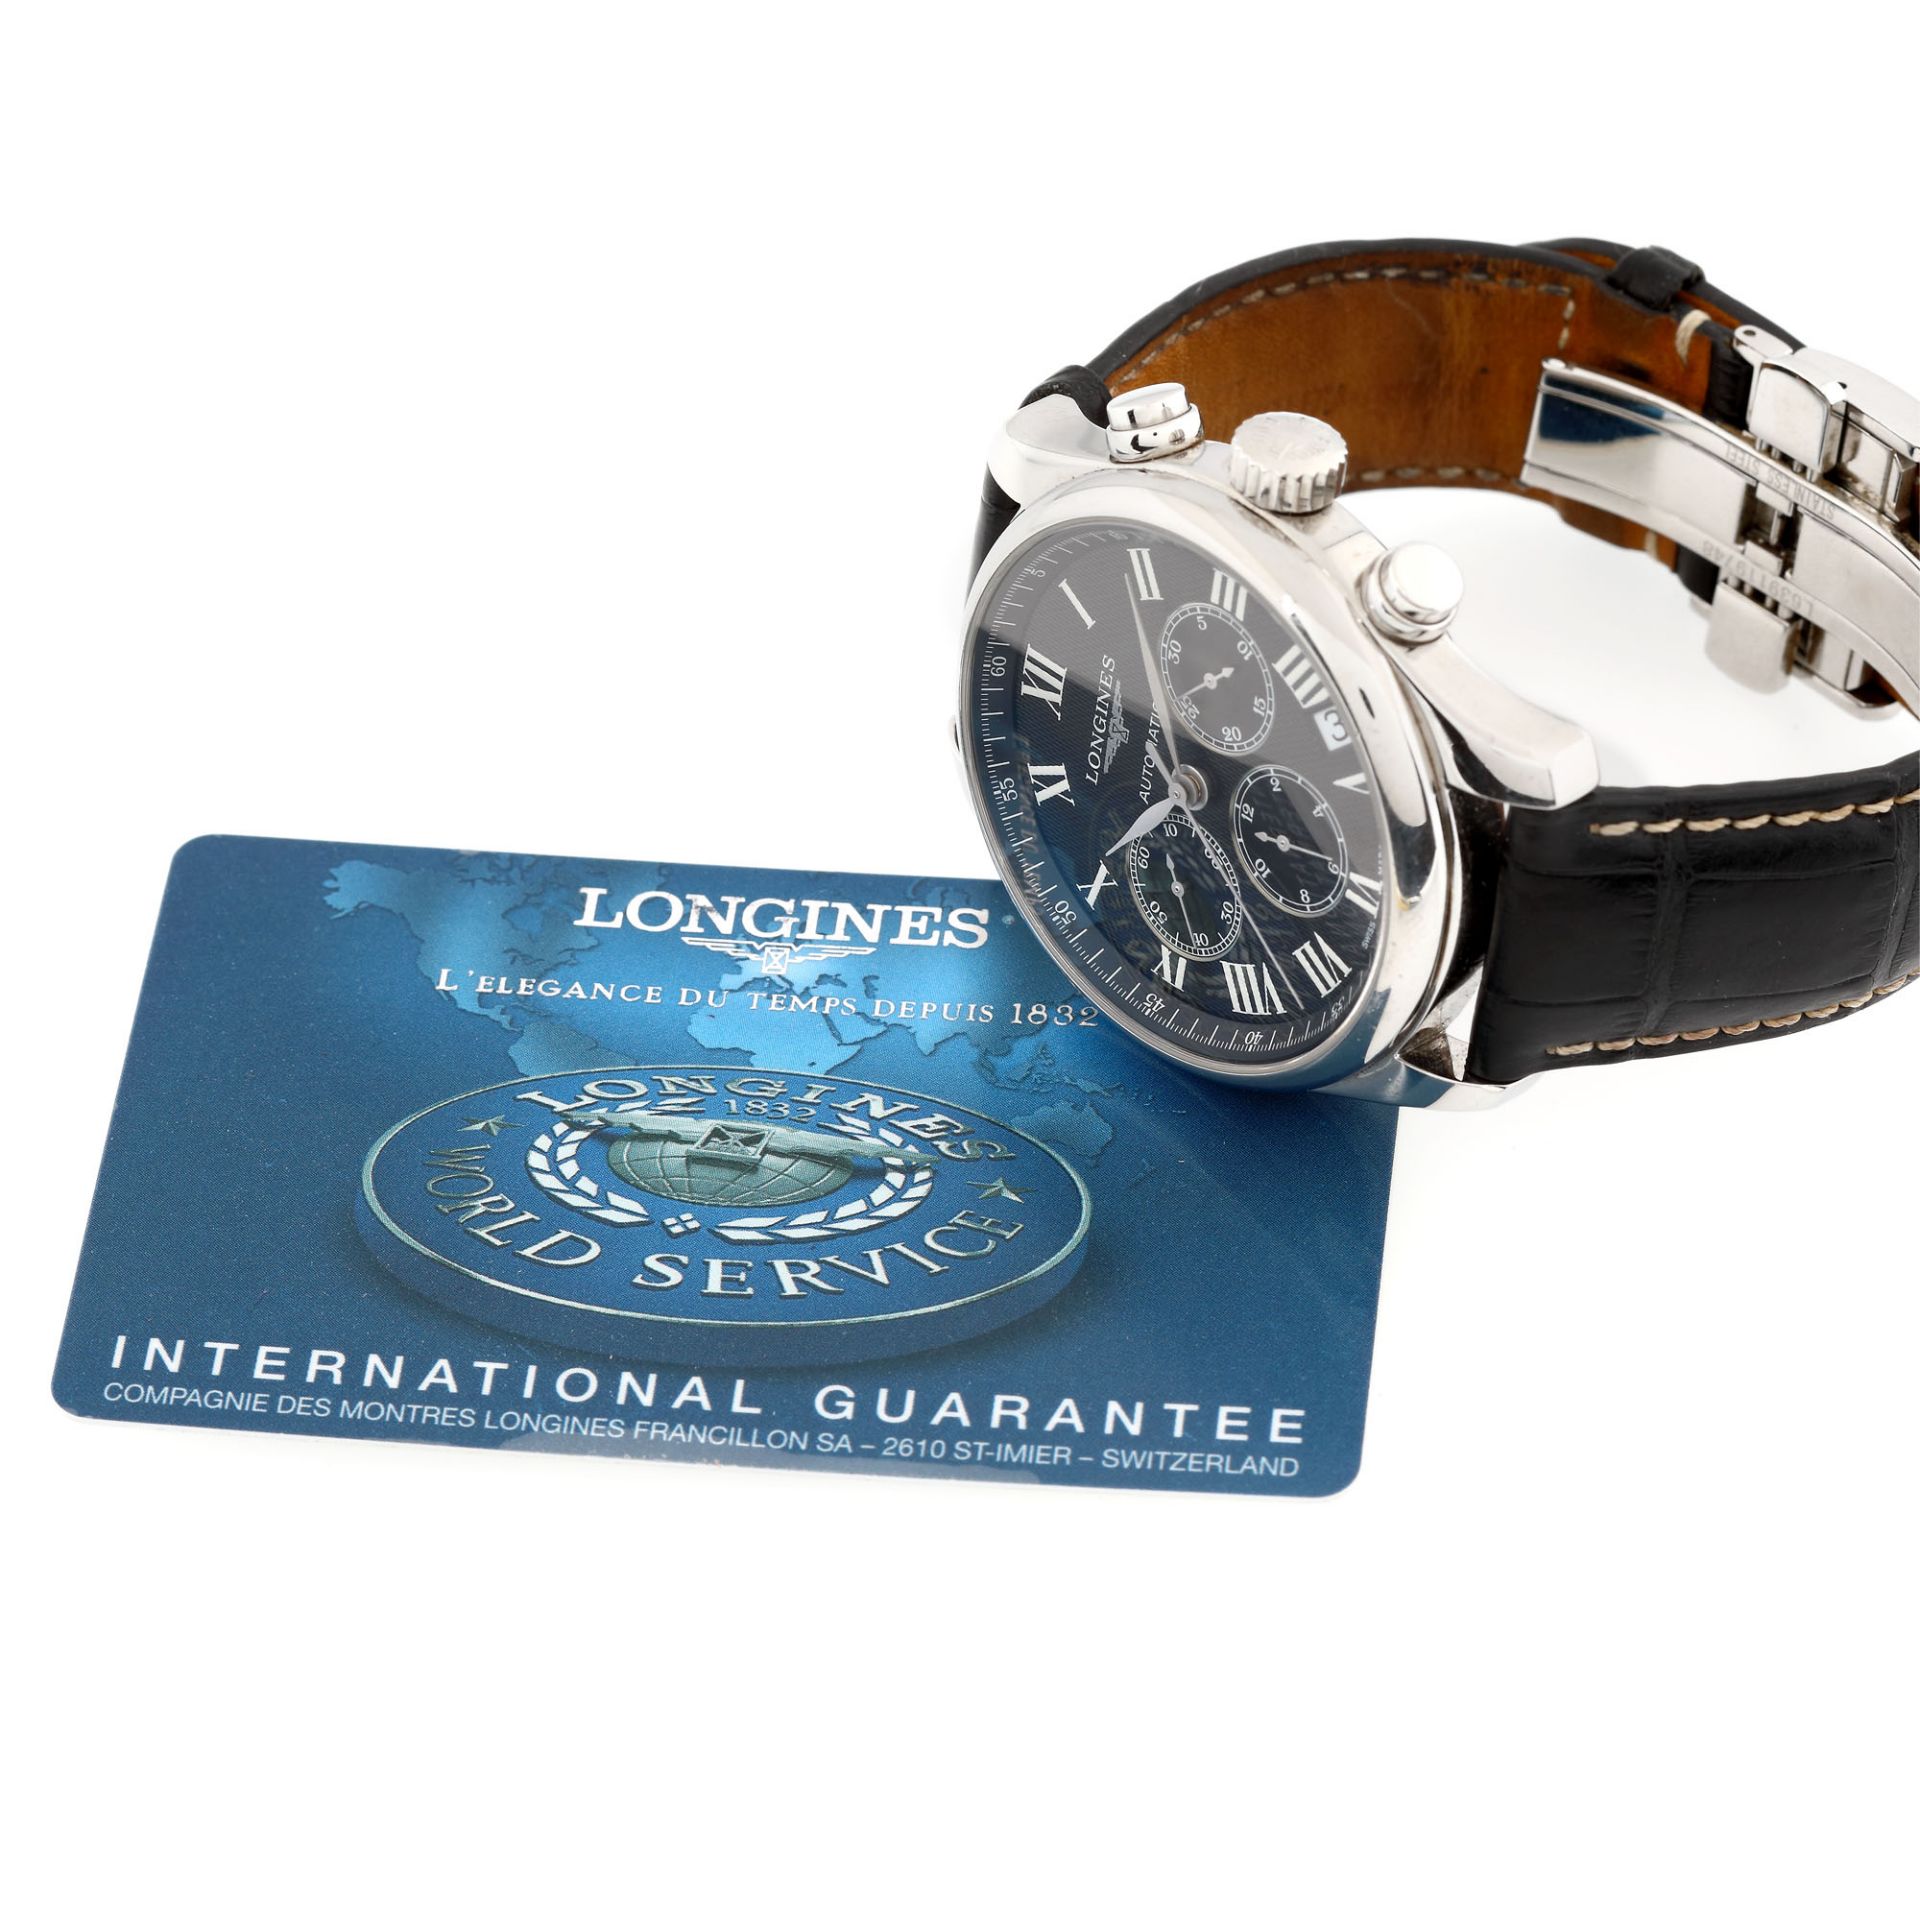 Longines Master Collection wristwatch, men, guarantee card - Image 2 of 3